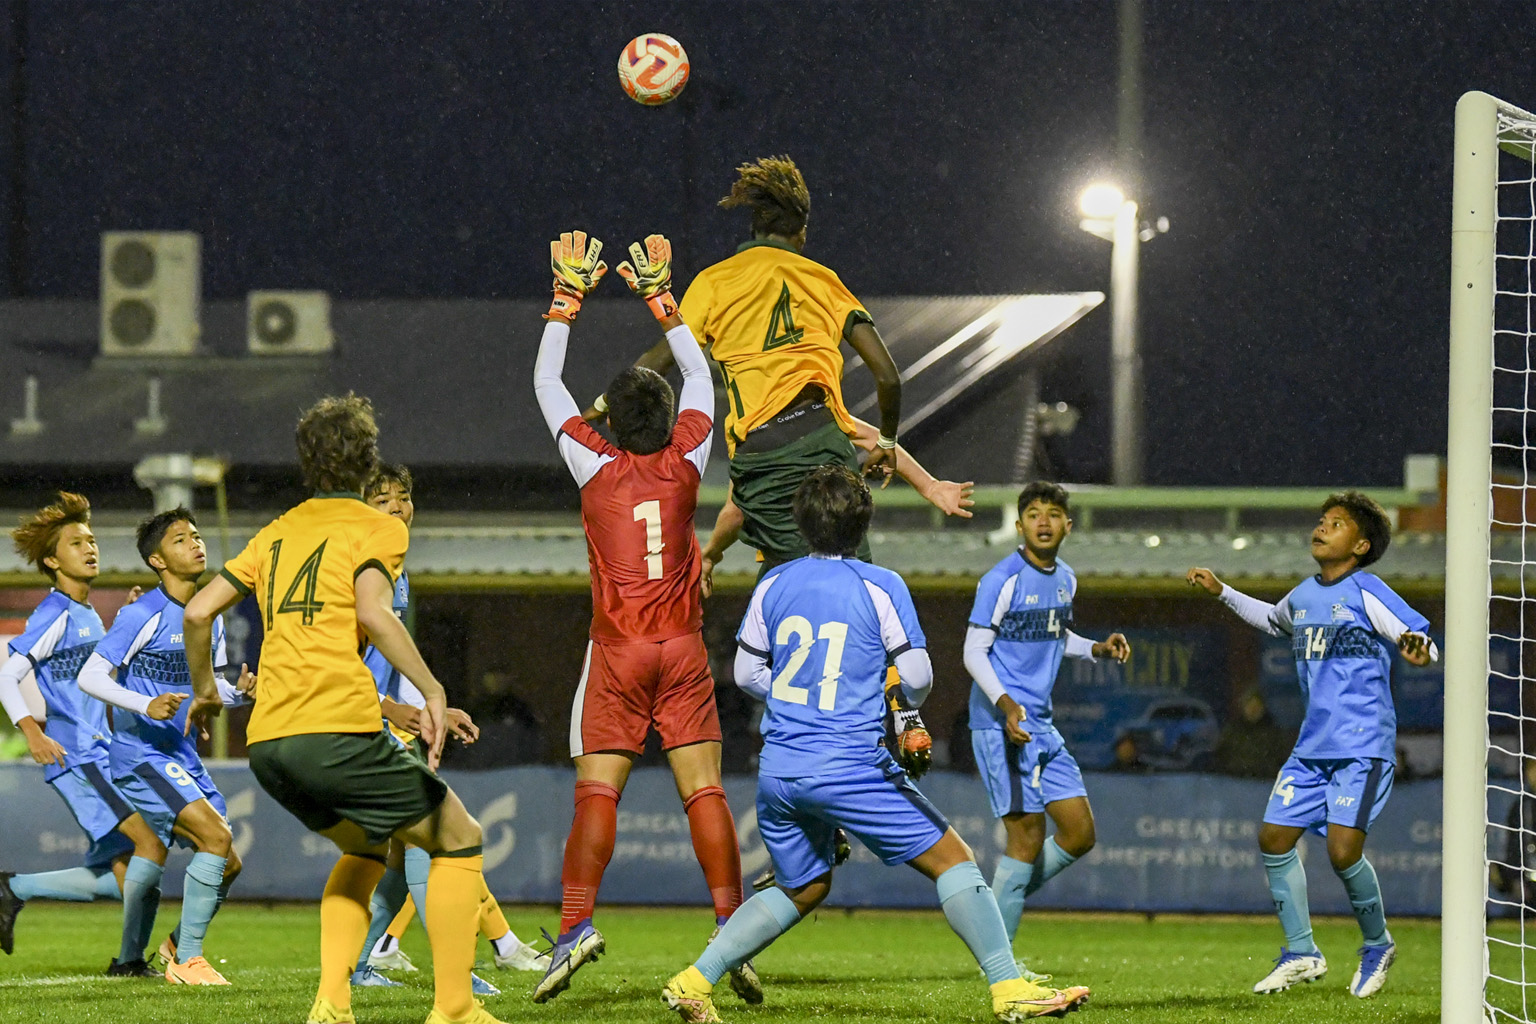 An Australian player leaps high to header the ball away from a goalie while Northern Mariana Islands players gather around.